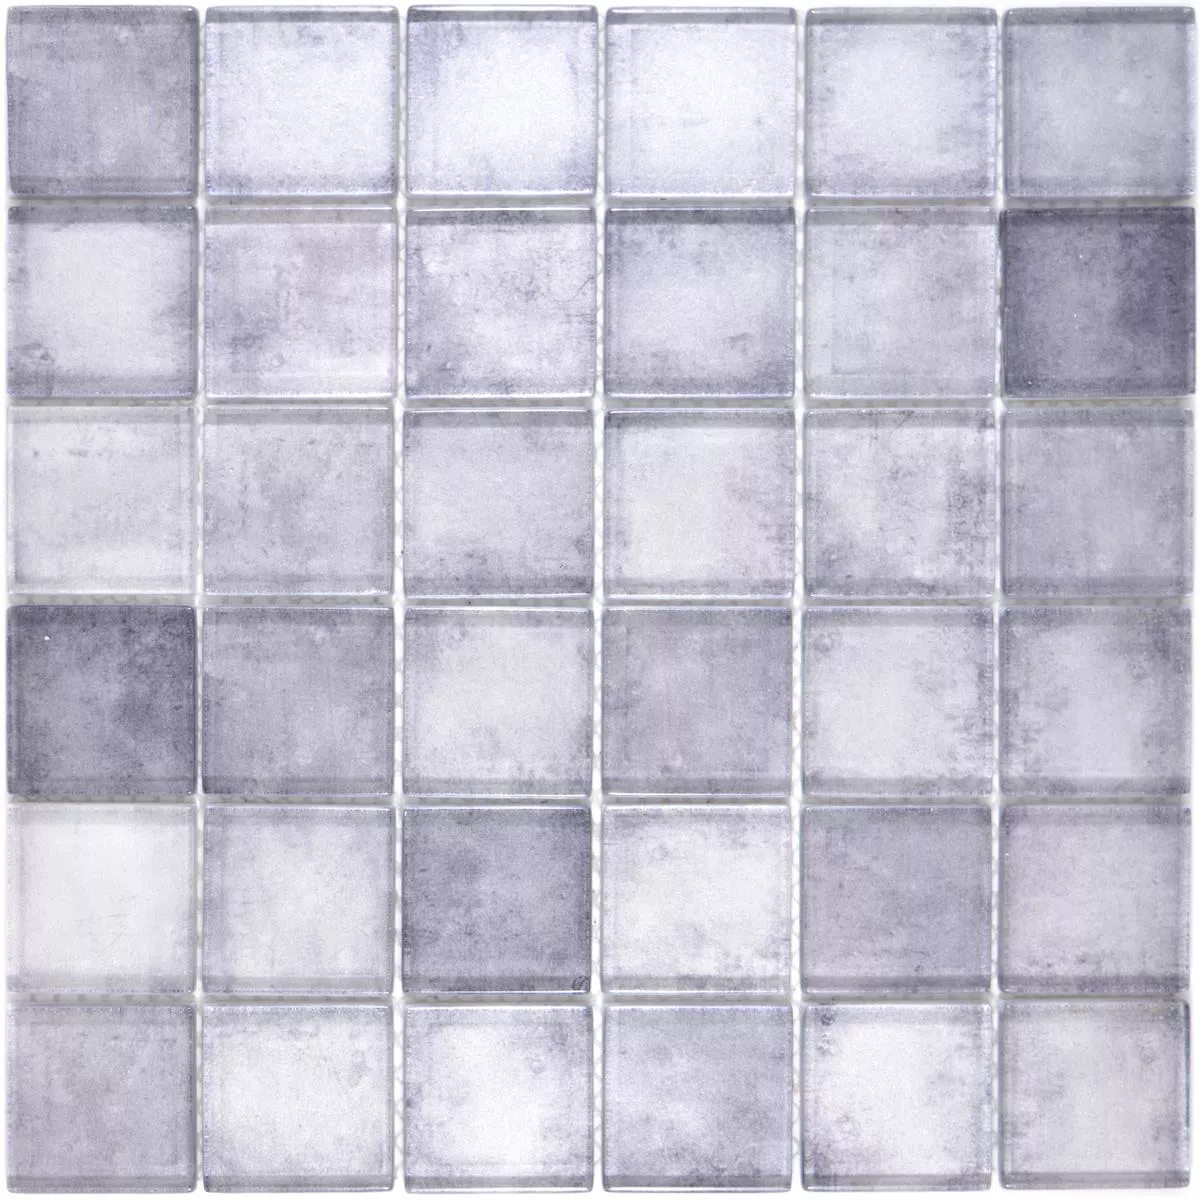 Glass Mosaic Tiles Clementine Grey